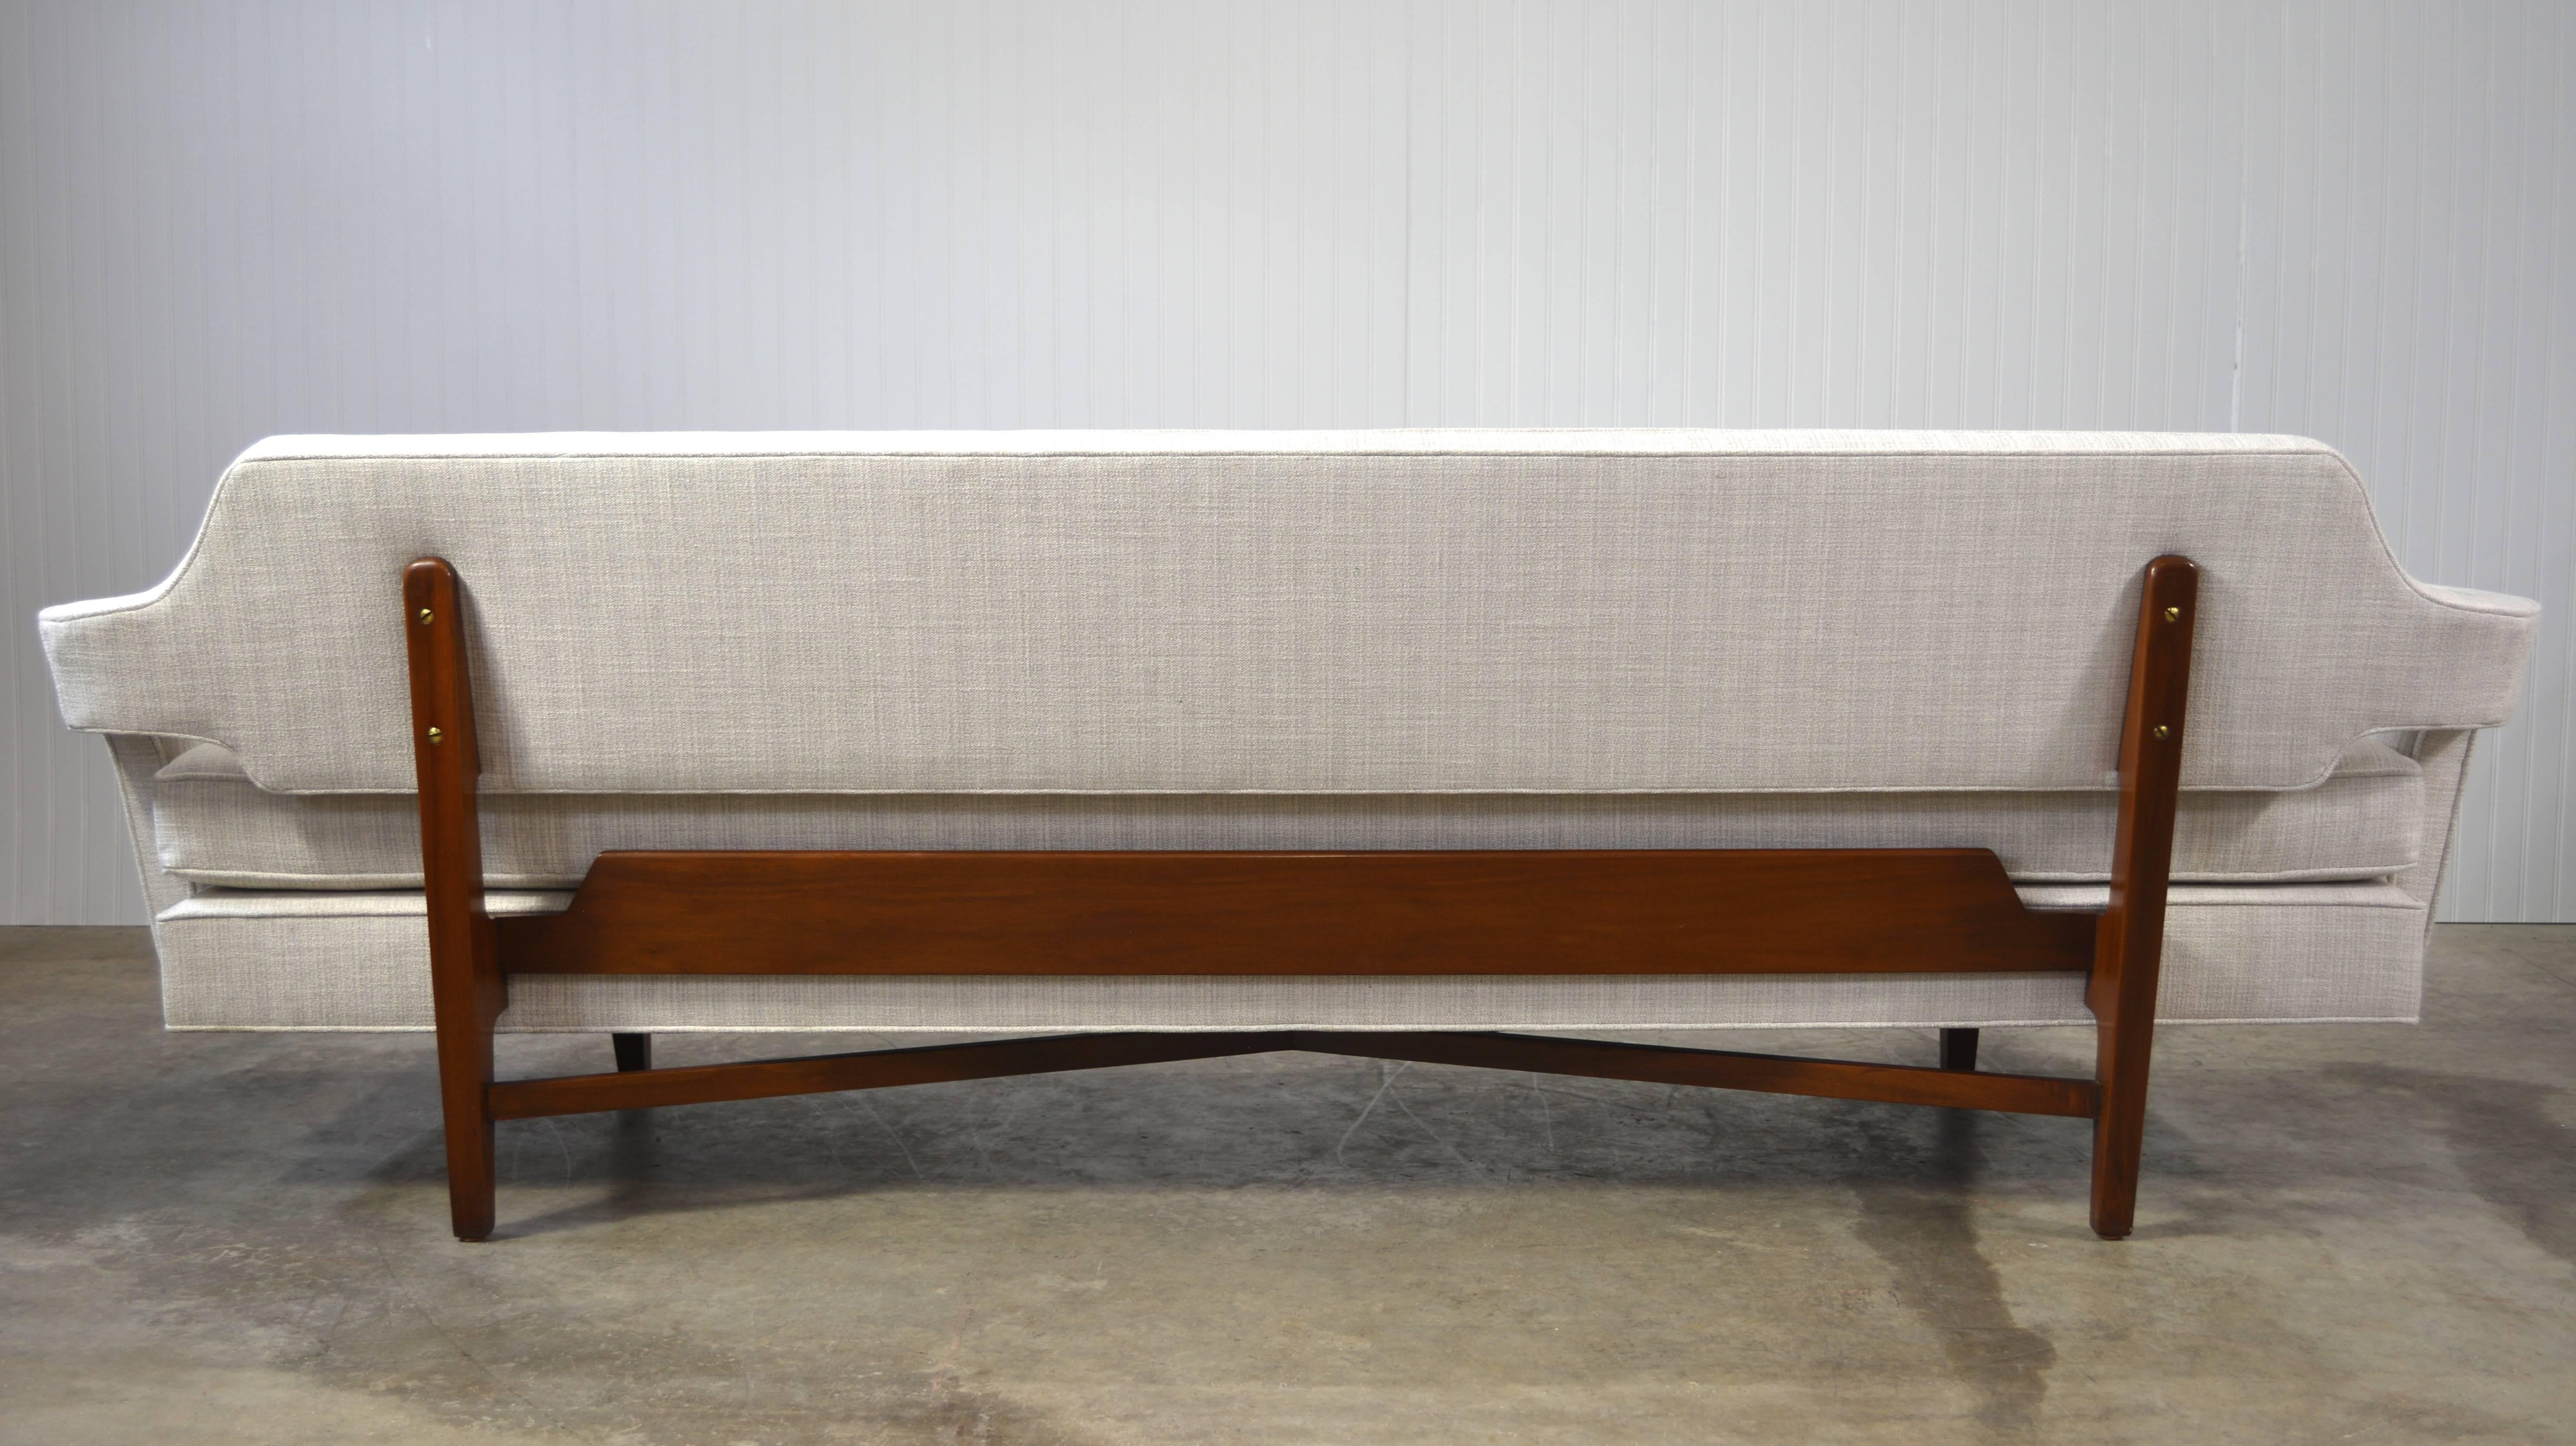 A stunning and rare pair of sofas by Edward Wormley for Dunbar. Unique bracket back and X-base stretchers. Solid mahogany frames. Newly recovered.